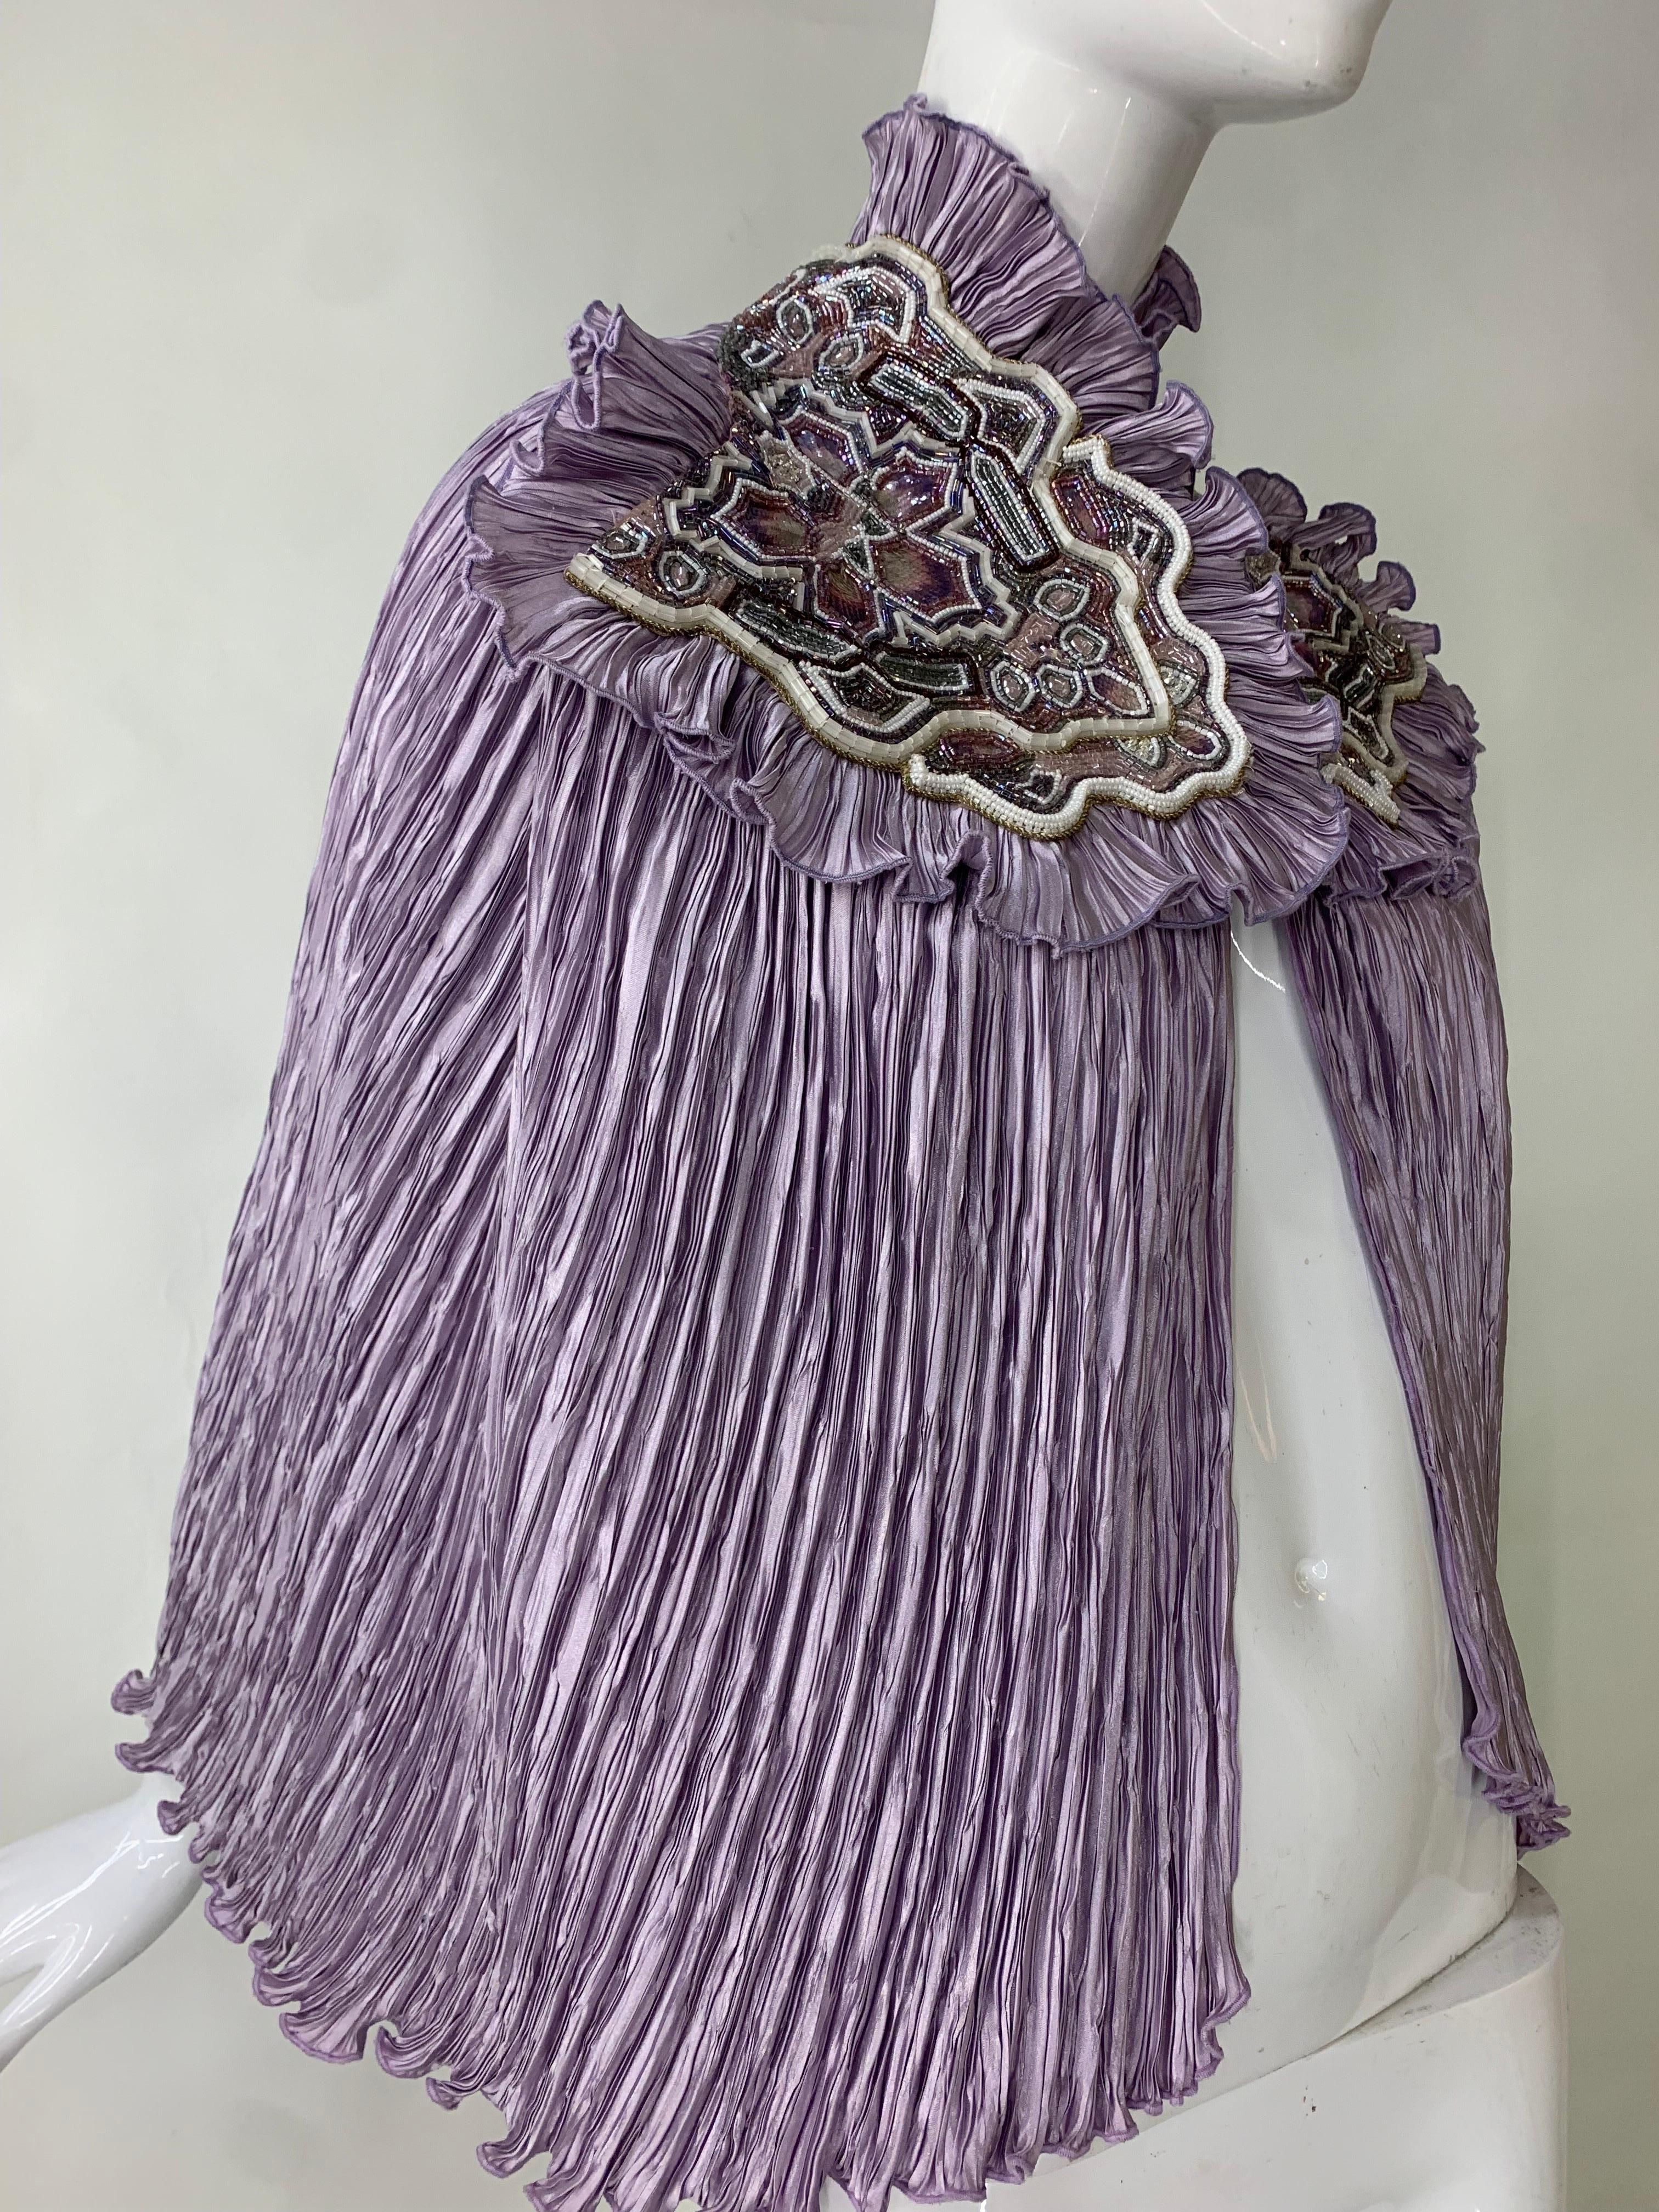 Torso Creations Lavender Pleated Silk Caplet w Heavily Beaded & Embroidered Appliques:  This unique piece is fashioned from a vintage Mary McFadden gown by Torso Creations for a one-of-a-kind showstopper! Features large beaded and embroidered